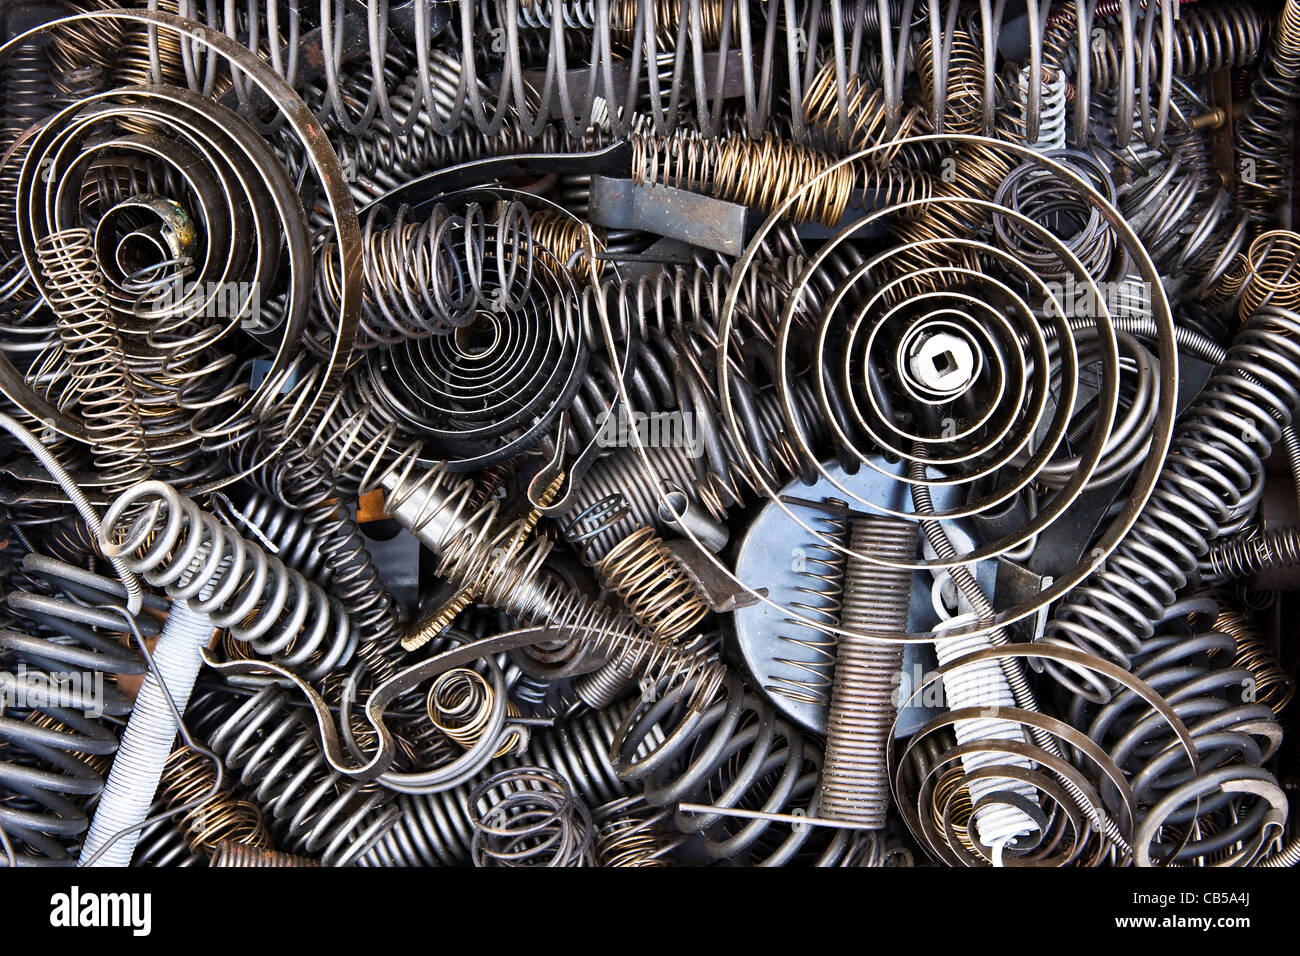 Springs, coils and spare parts Stock Photo